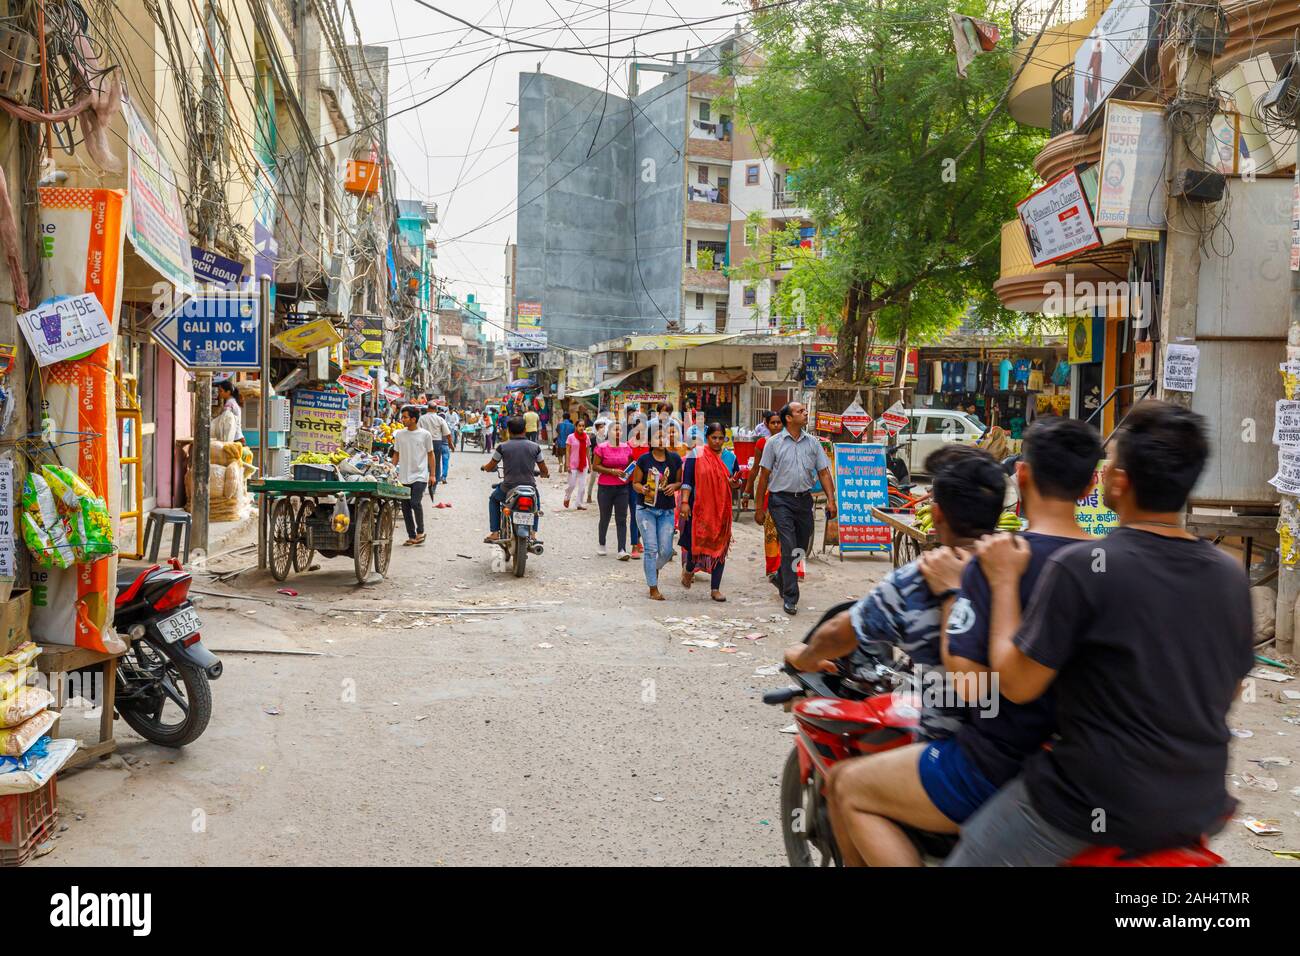 Busy street scene in a shopping area of Mahipalpur district, a suburb near Delhi Airport in New Delhi, capital city of India Stock Photo